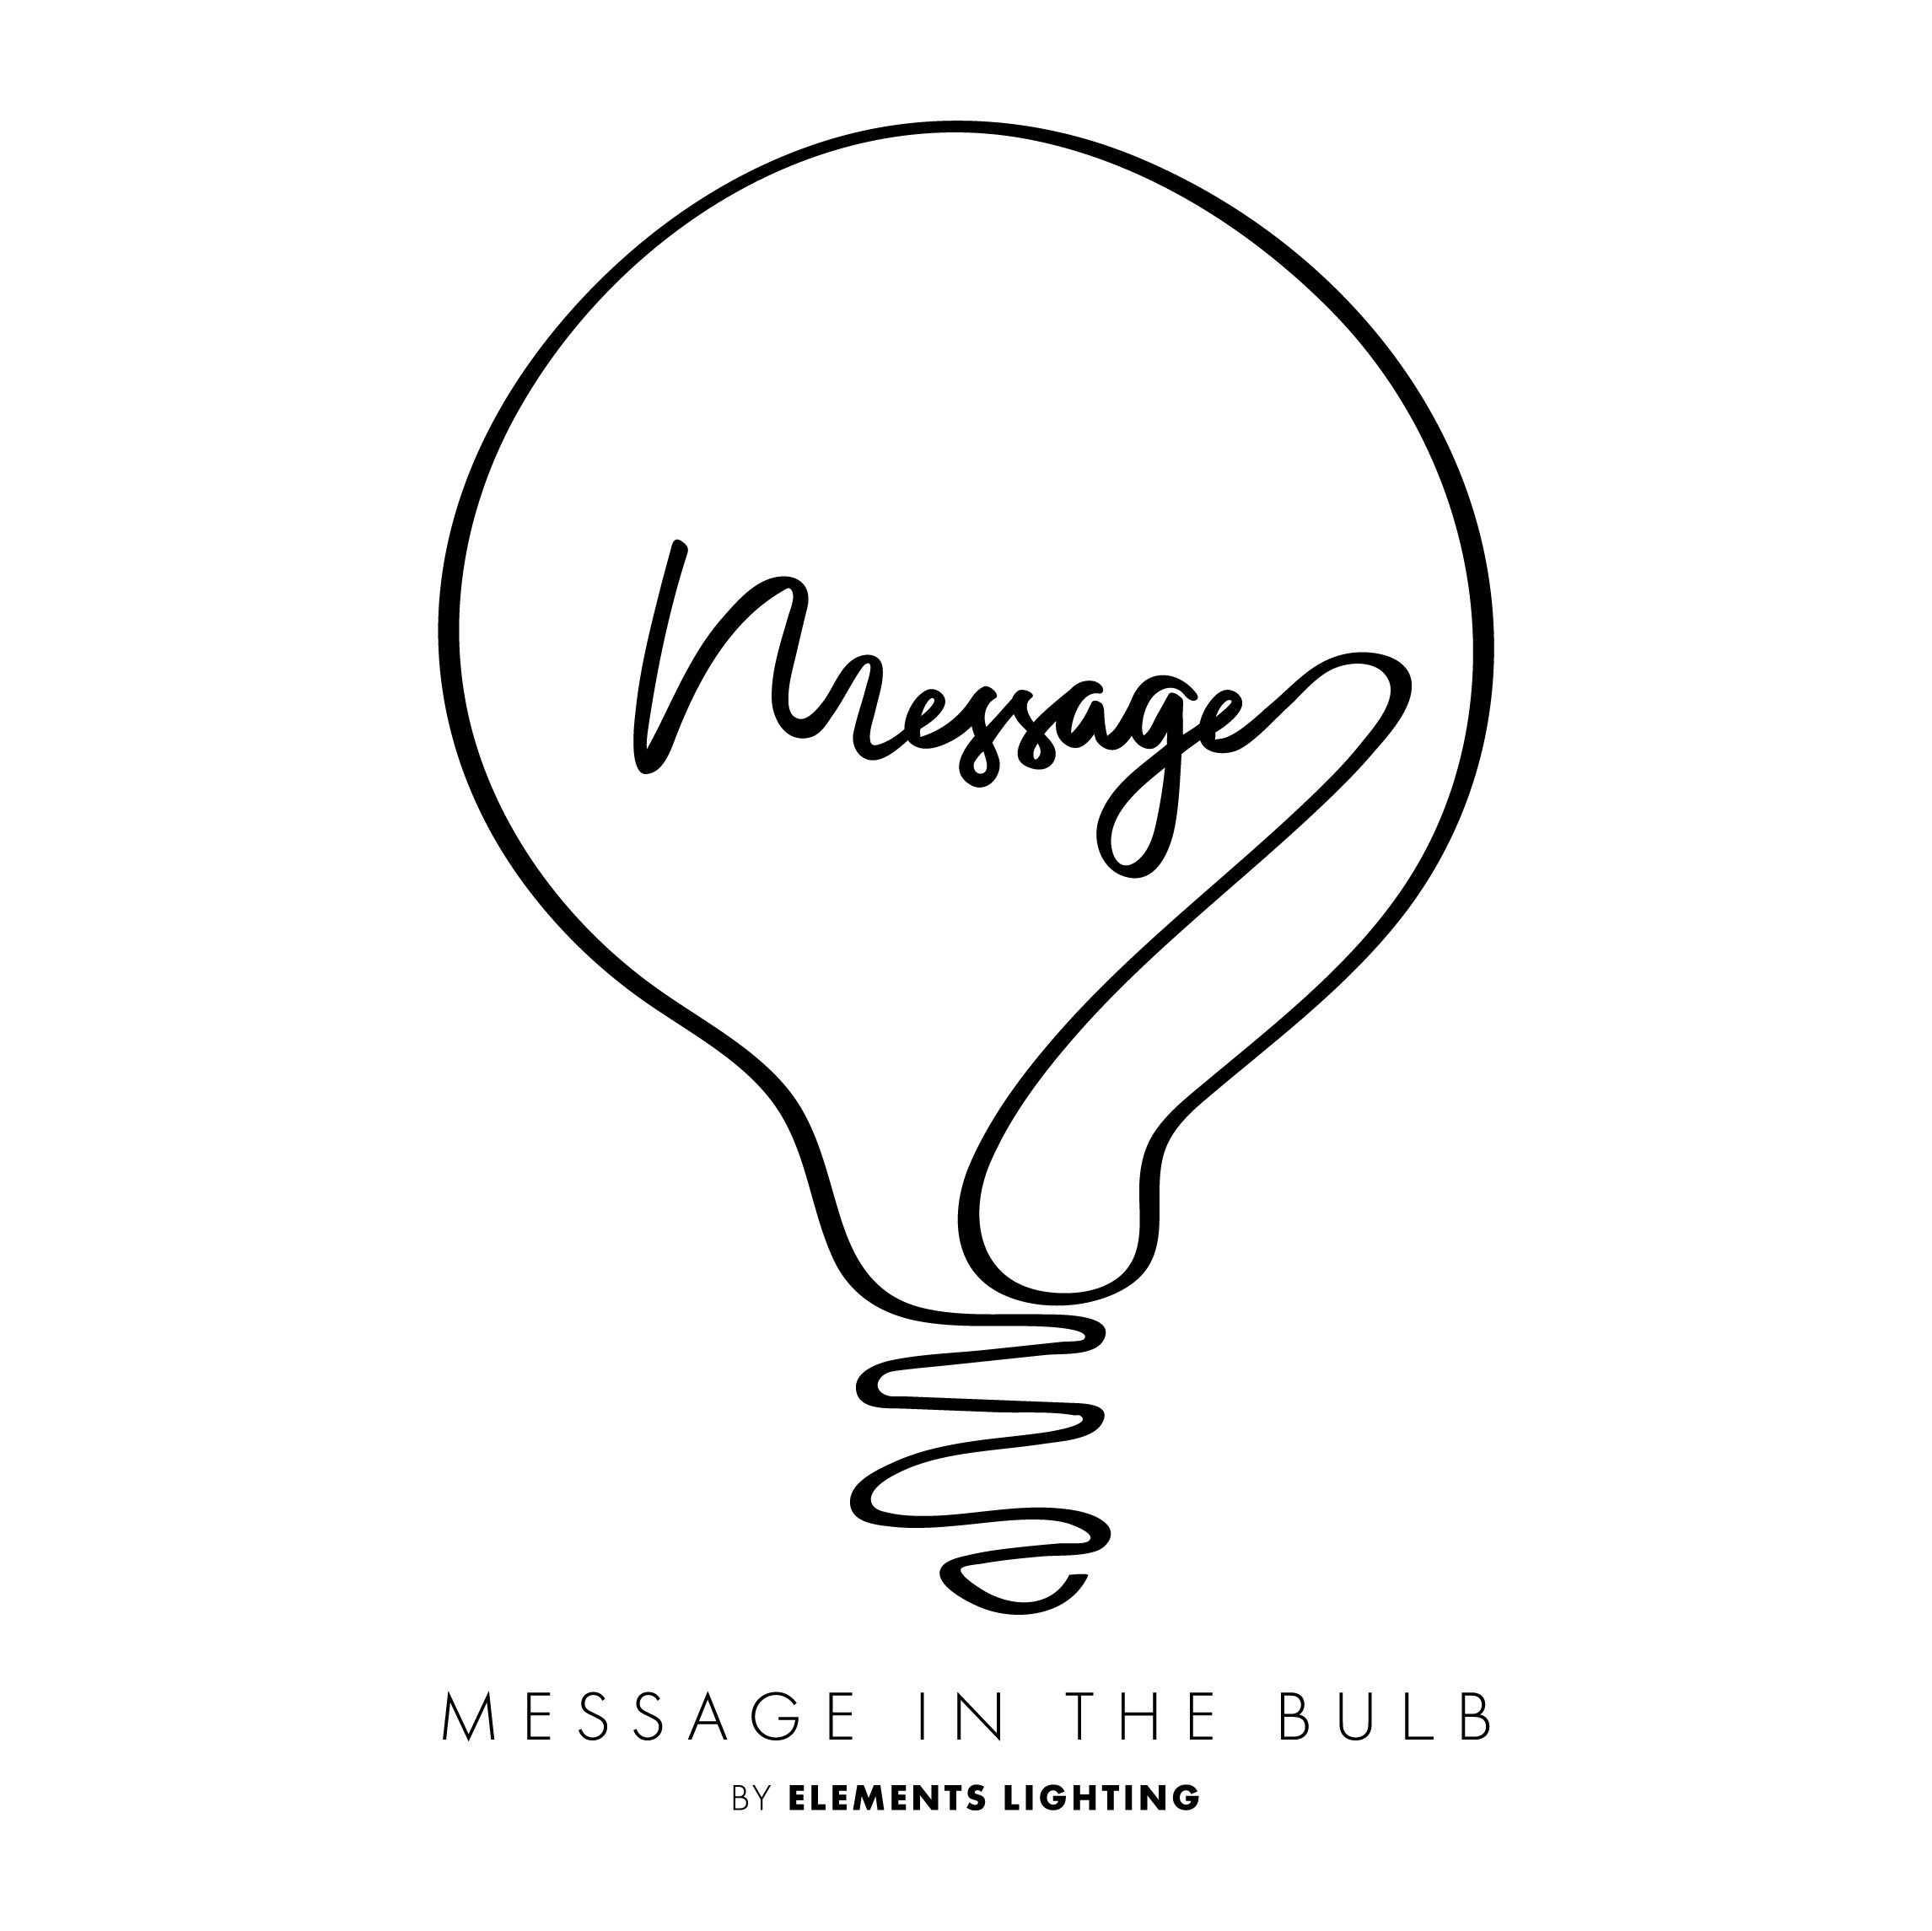 MESSAGE IN THE BULB